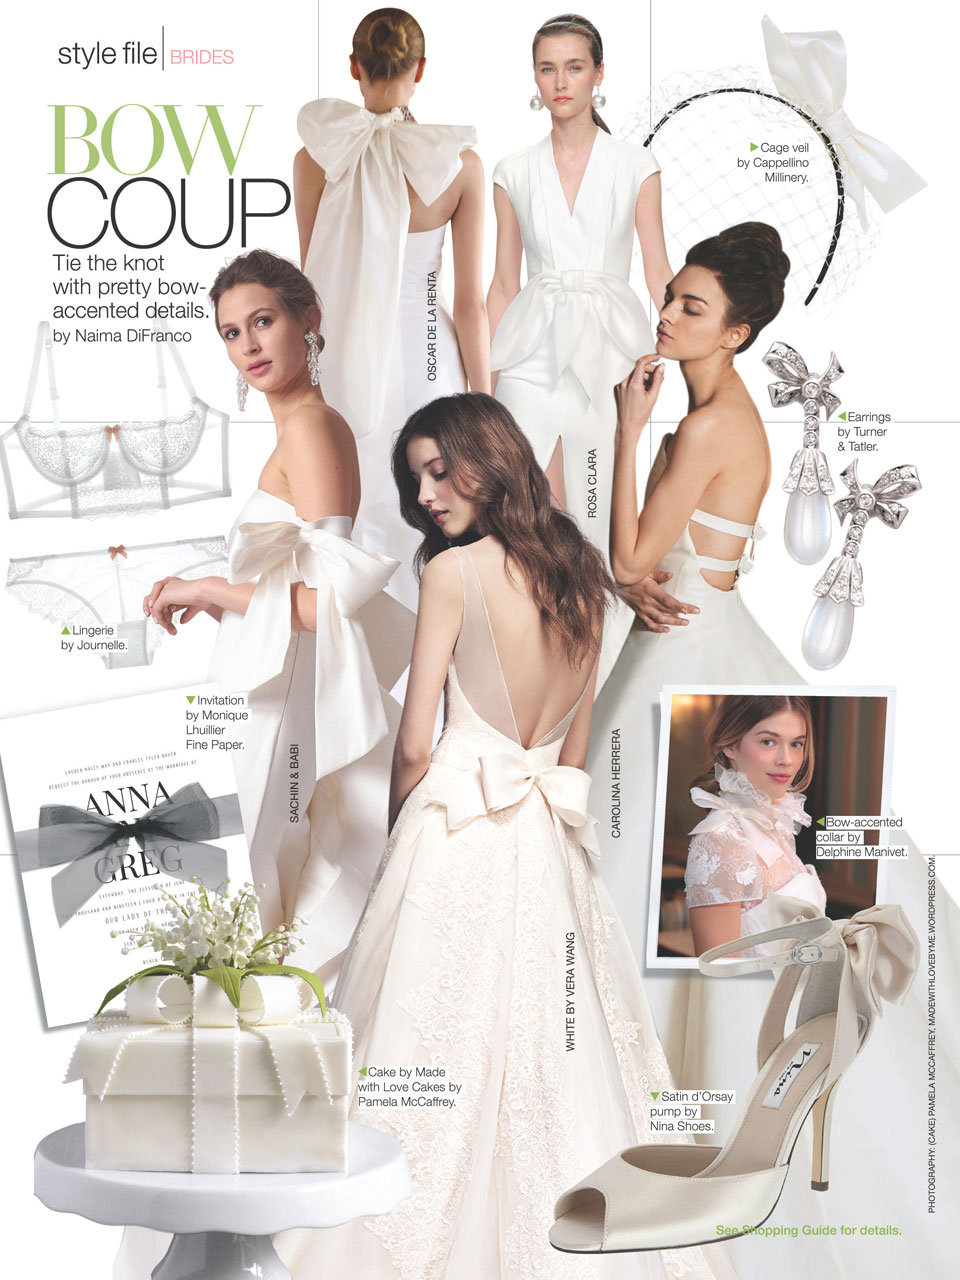 Inside the New Issue | BridalGuide